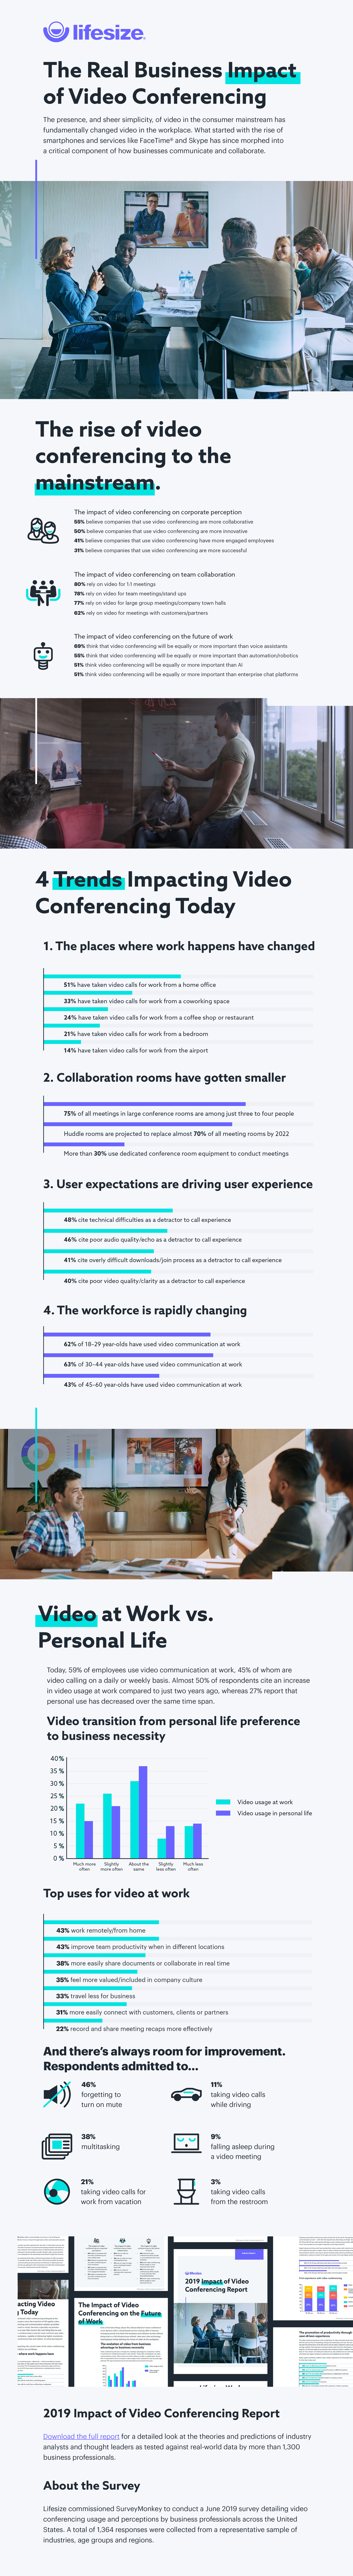 Lifesize 2019 Impact of Video Conferencing Report Infographic